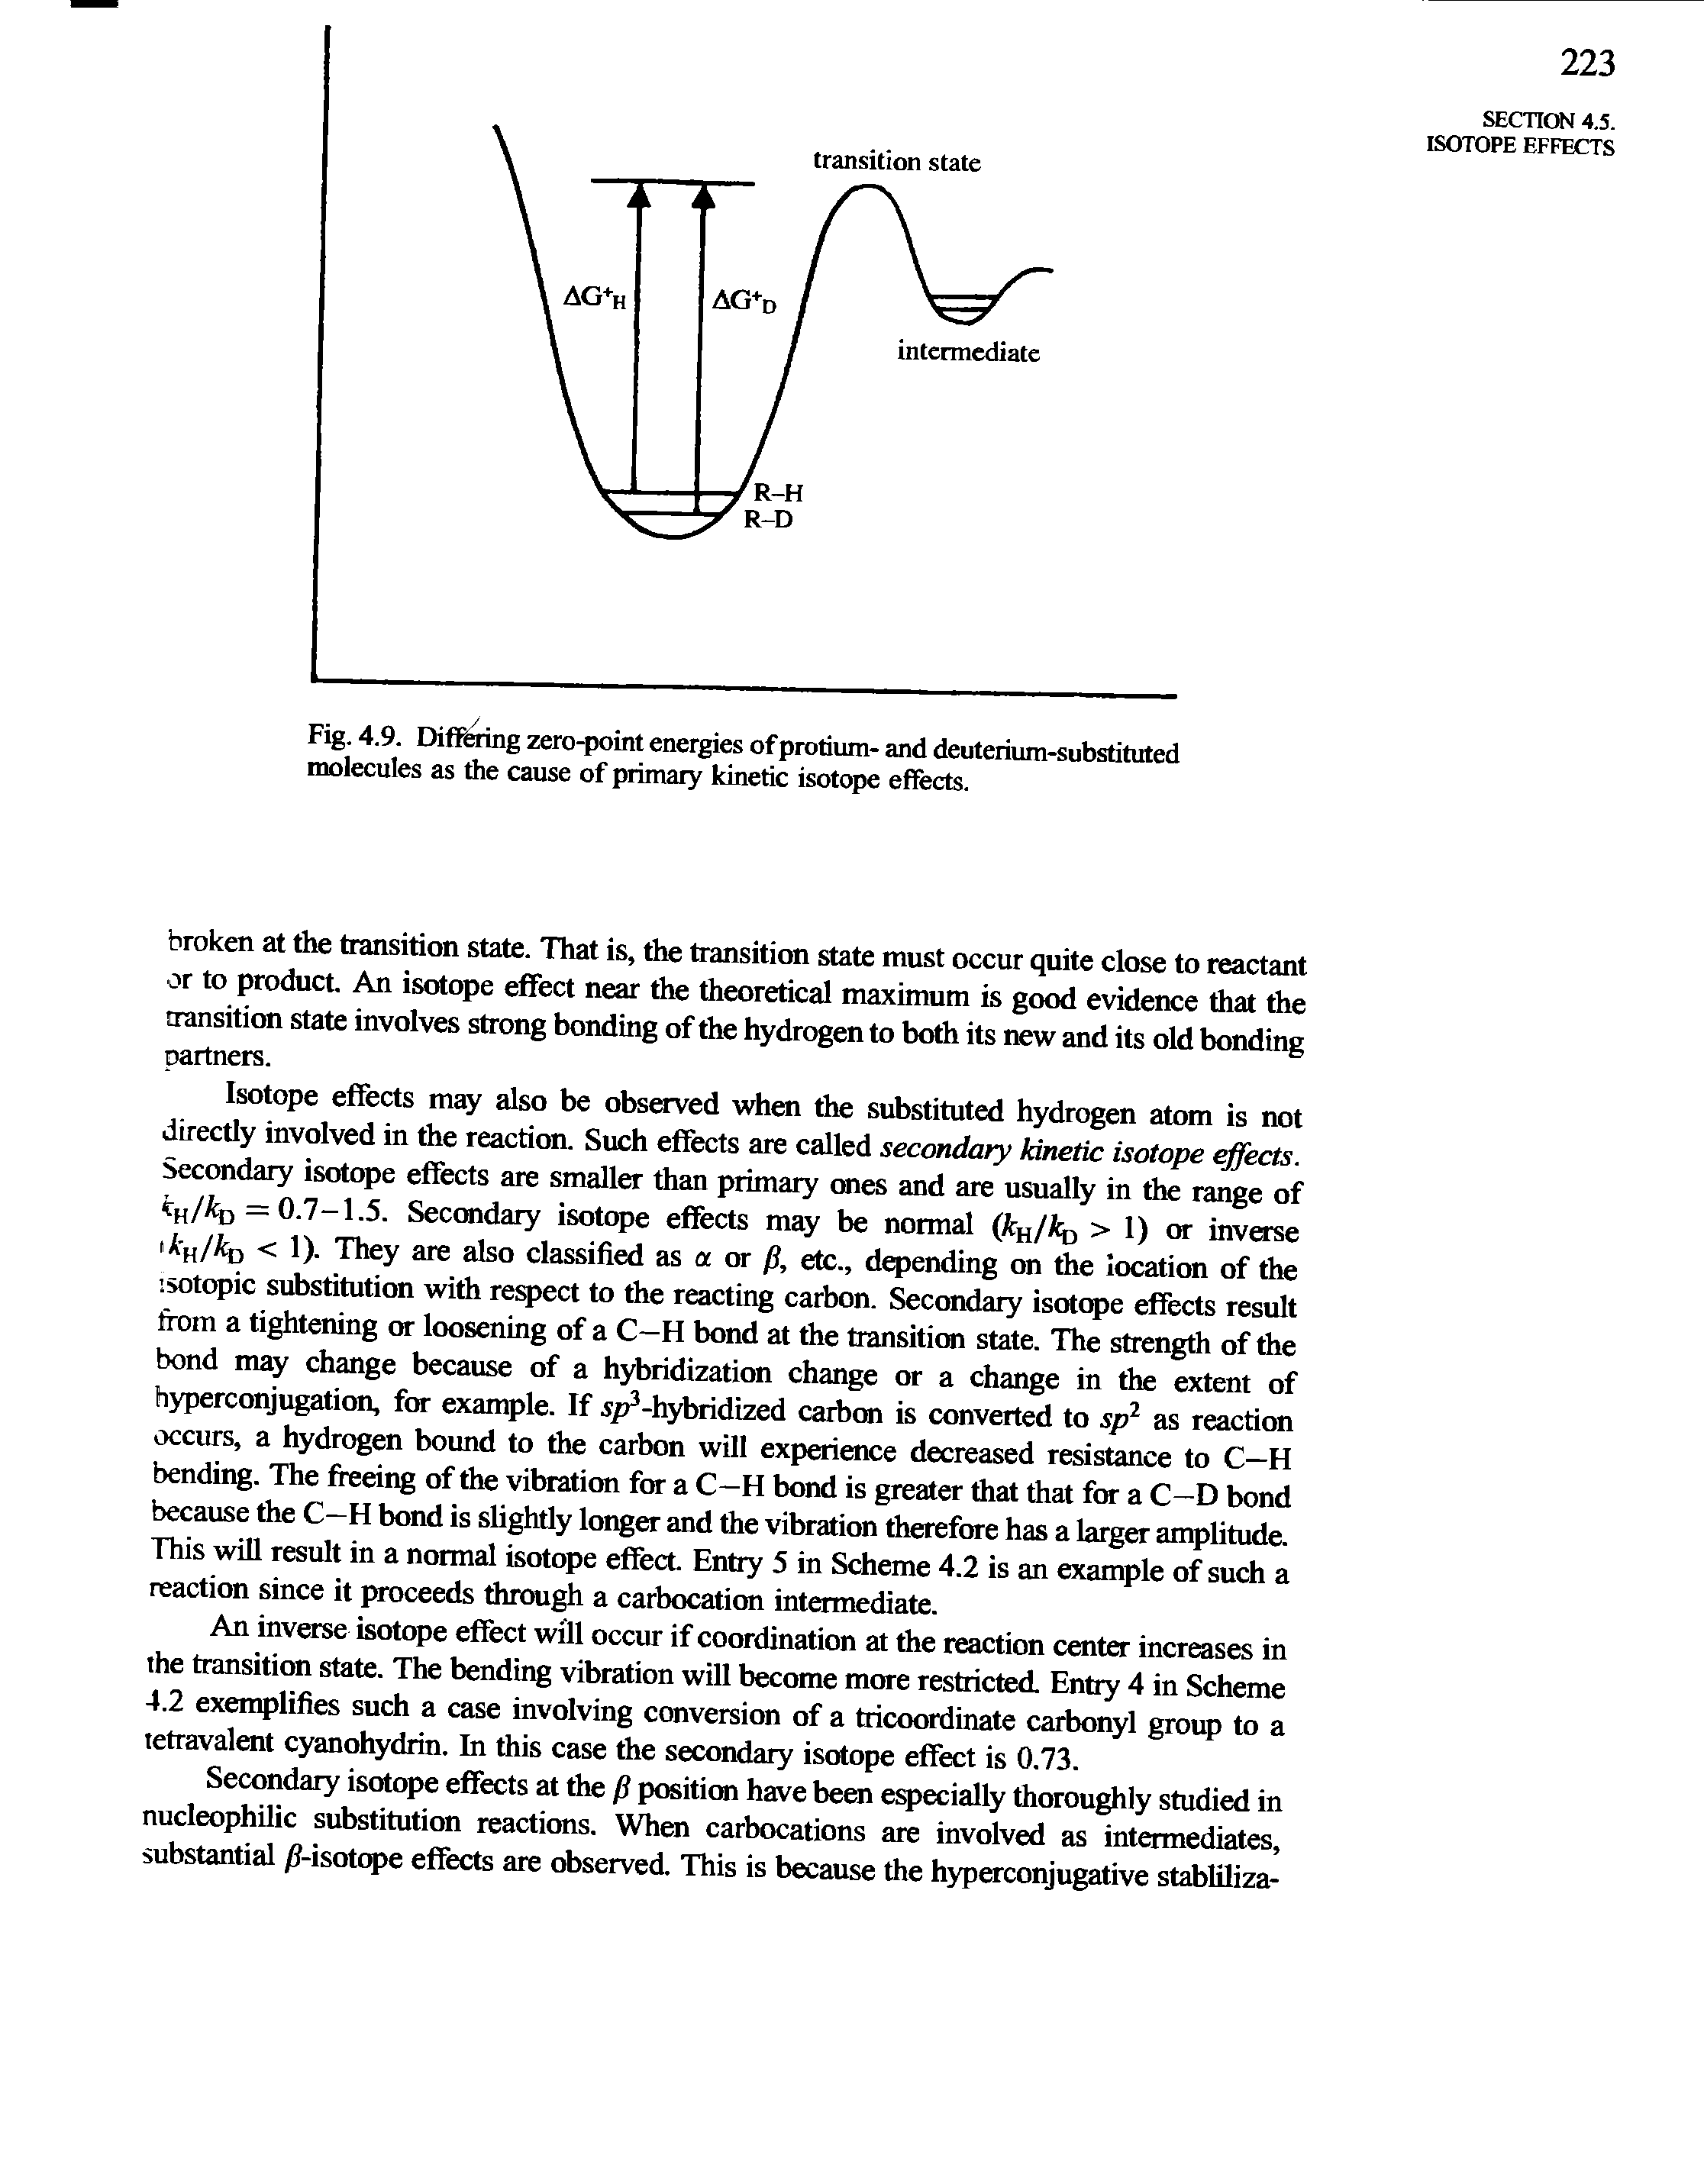 Fig. 4.9. DifiBoing zero-point energies ofprotium- and deuterium-substituted molecules as the cause of primary kinetic isotope effects.